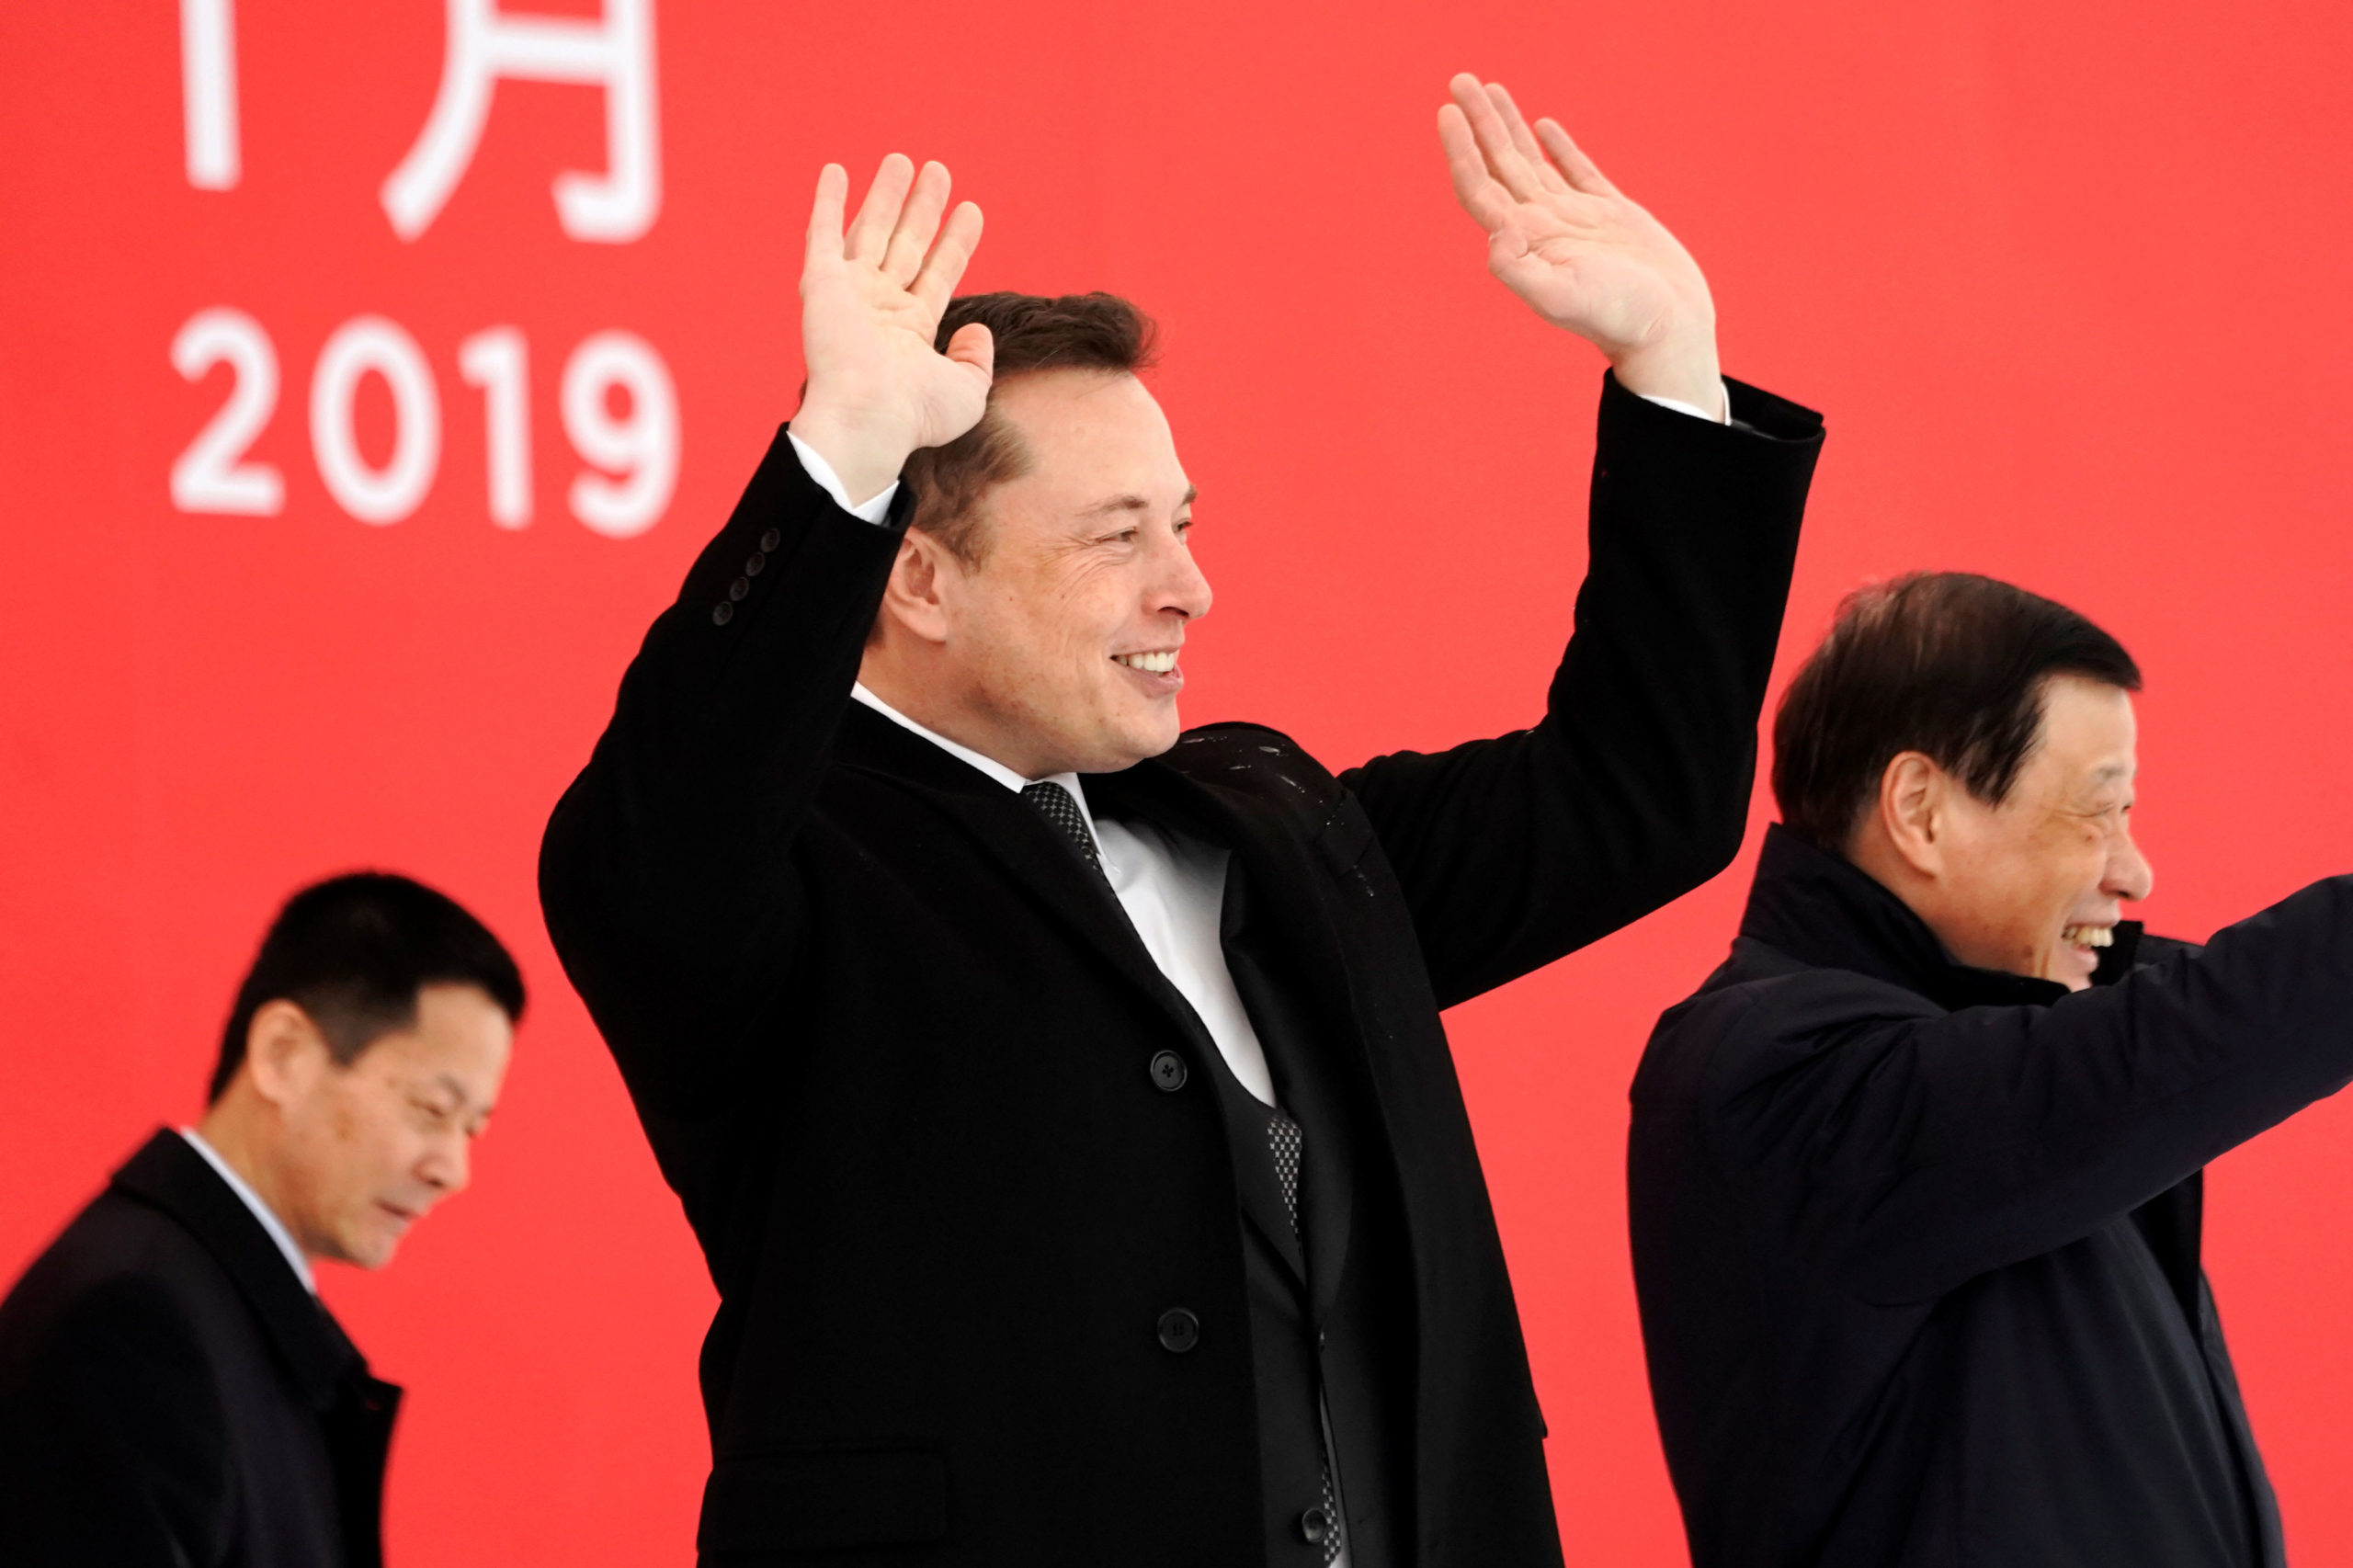 Jim Cramer believes in Tesla on account of Elon Musk’s fast success in China